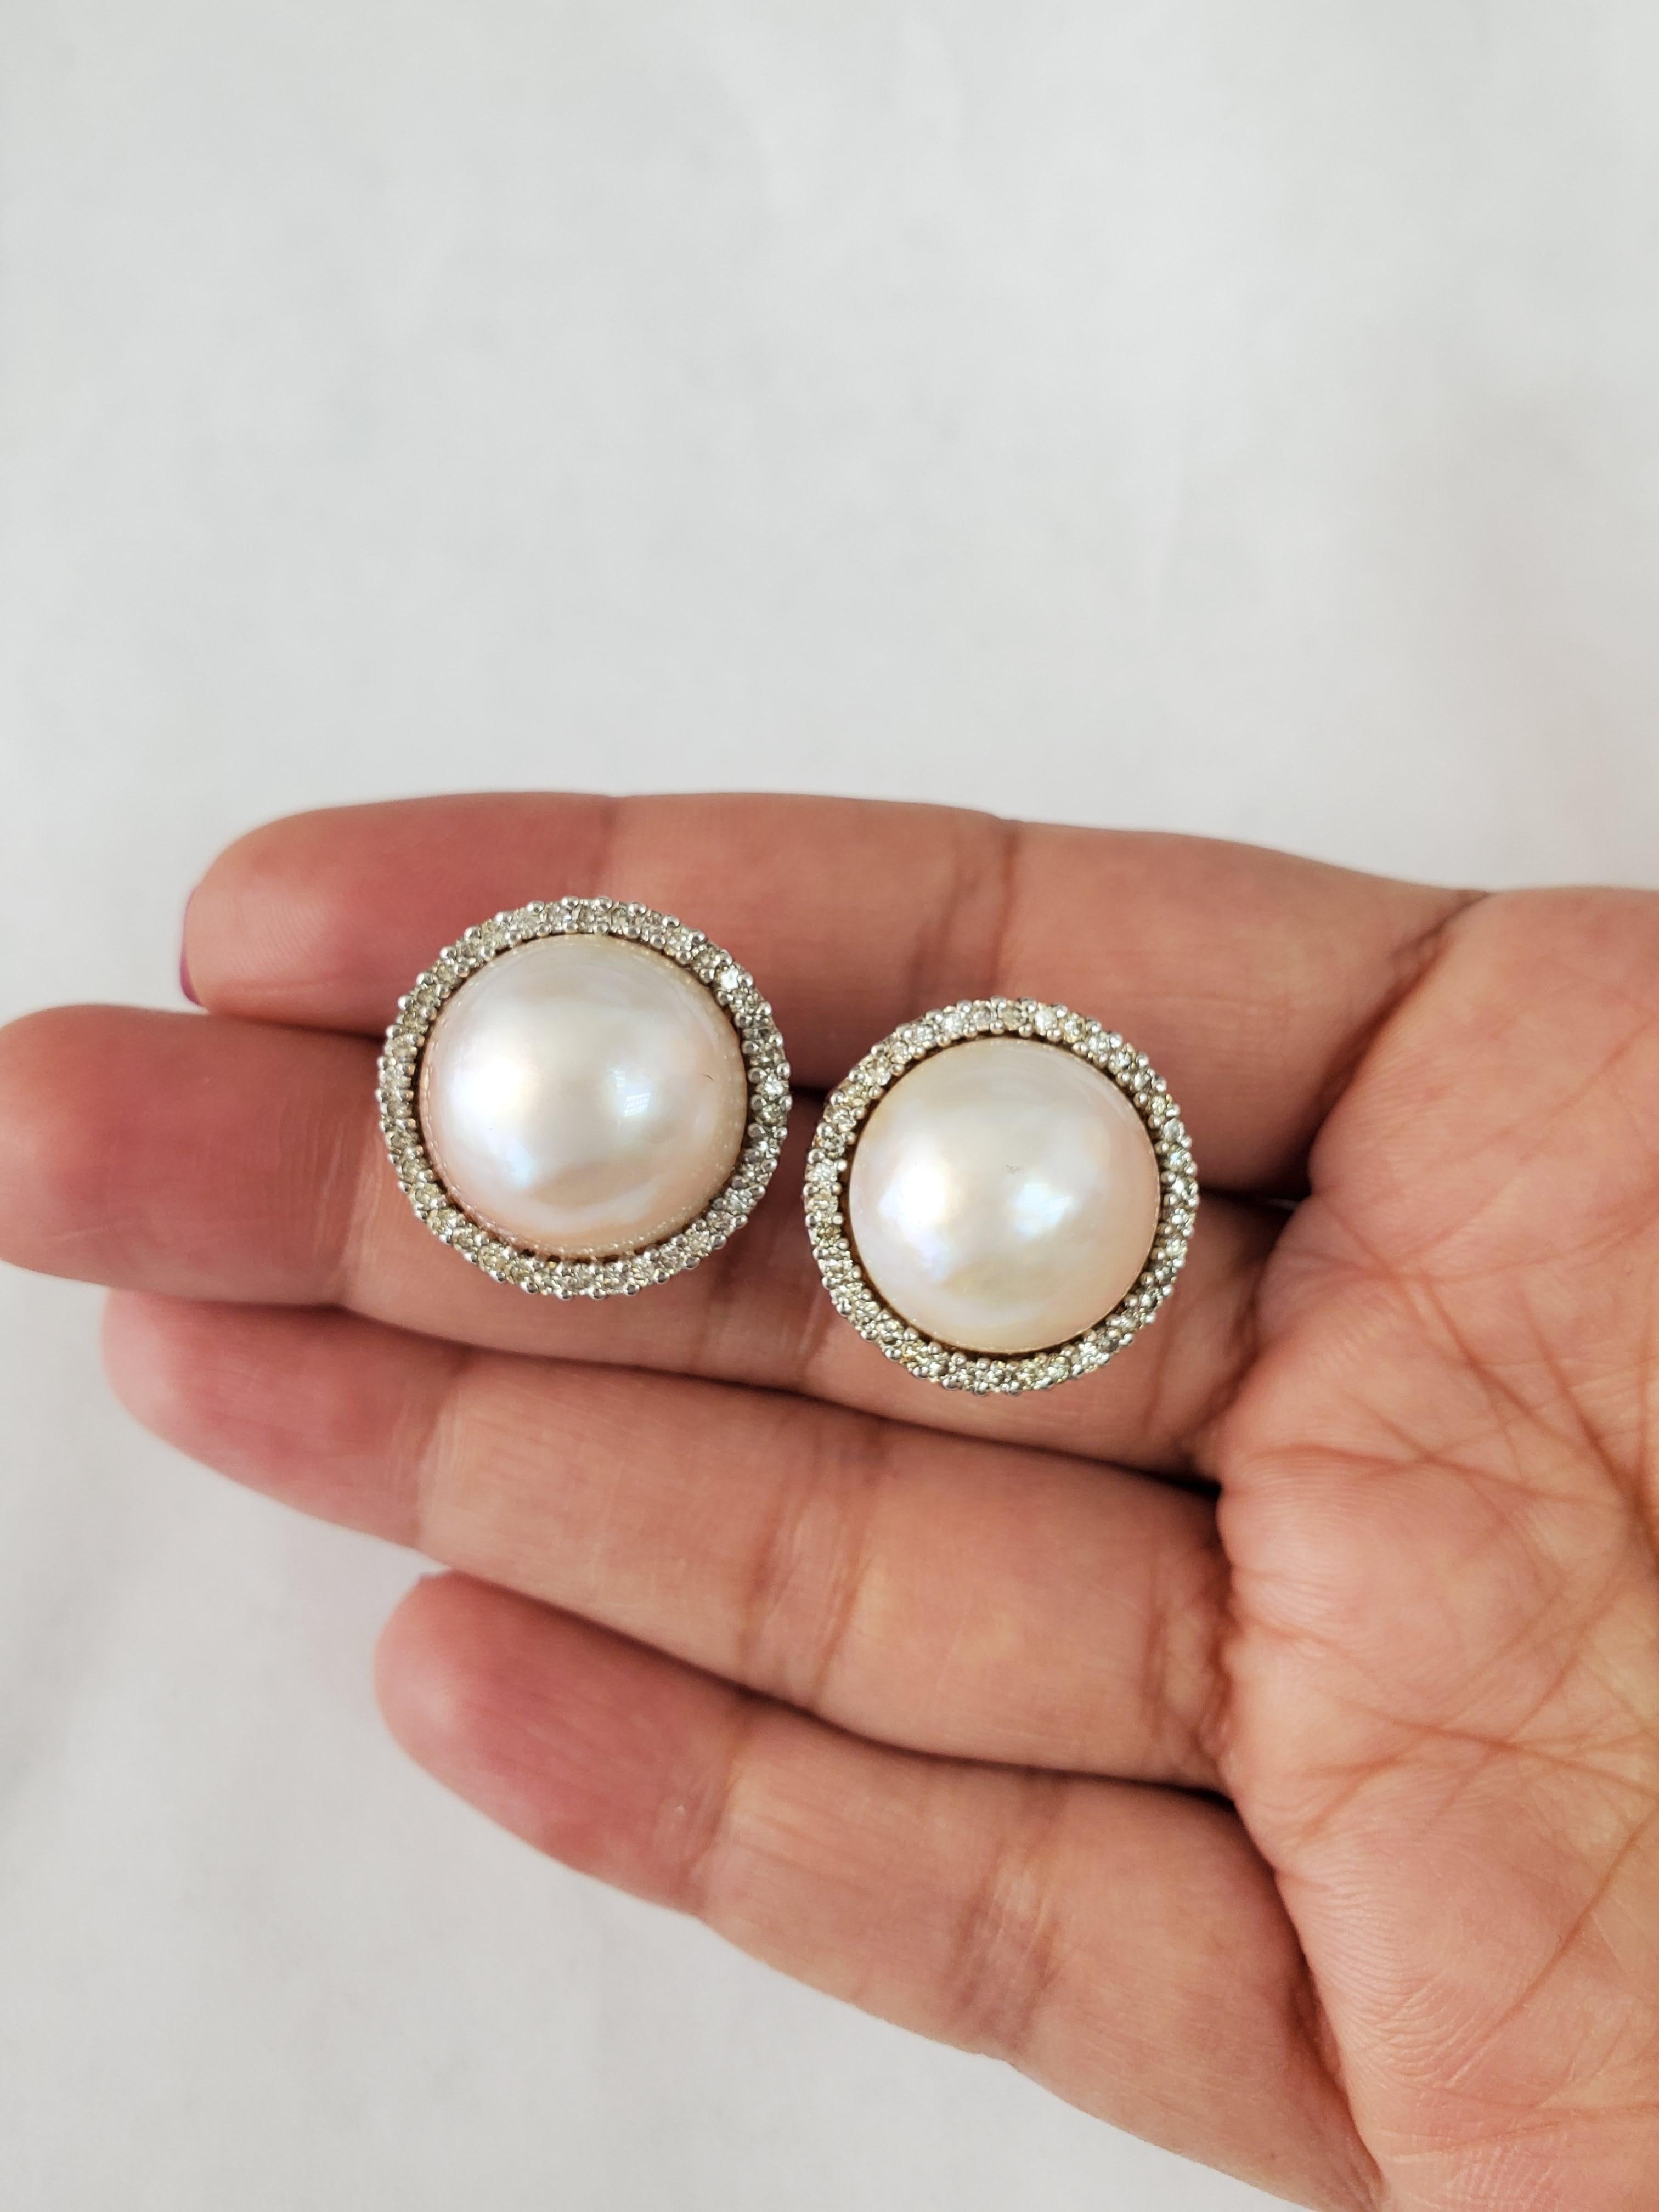 ♥ Product Summary ♥

Main Stone: Freshwater Pearl & Diamonds
Approx. Total Carat Weight: 1.00cttw 
Diamond Clarity: SI1/SI2
Diamond Color: G/H
Dimensions: 20mm
Metal Choice: 14K White Gold
Closure: Omega Clip On